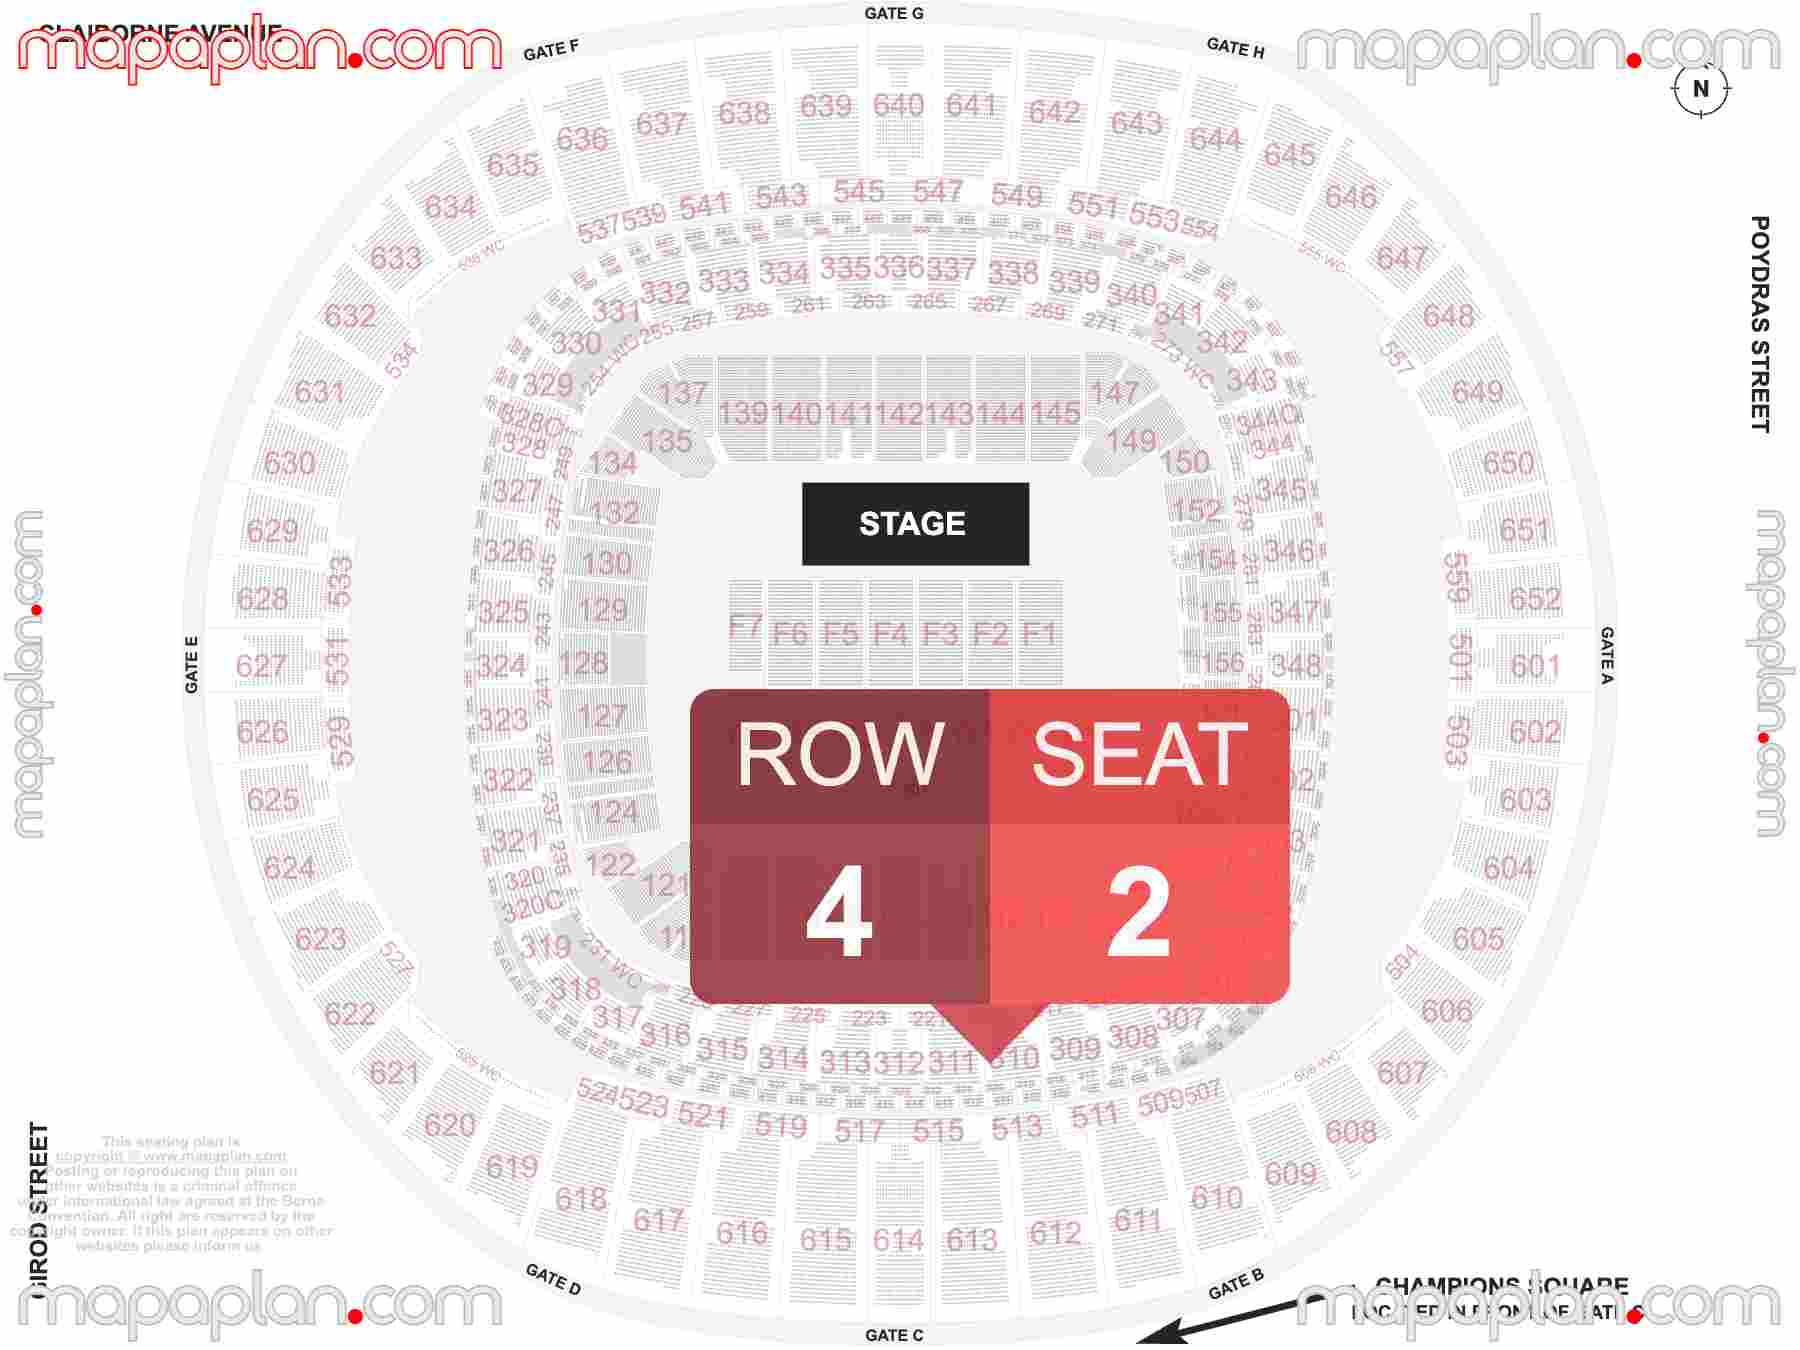 New Orleans Caesars Superdome seating chart Concert detailed seat numbers and row numbering chart with interactive map plan layout